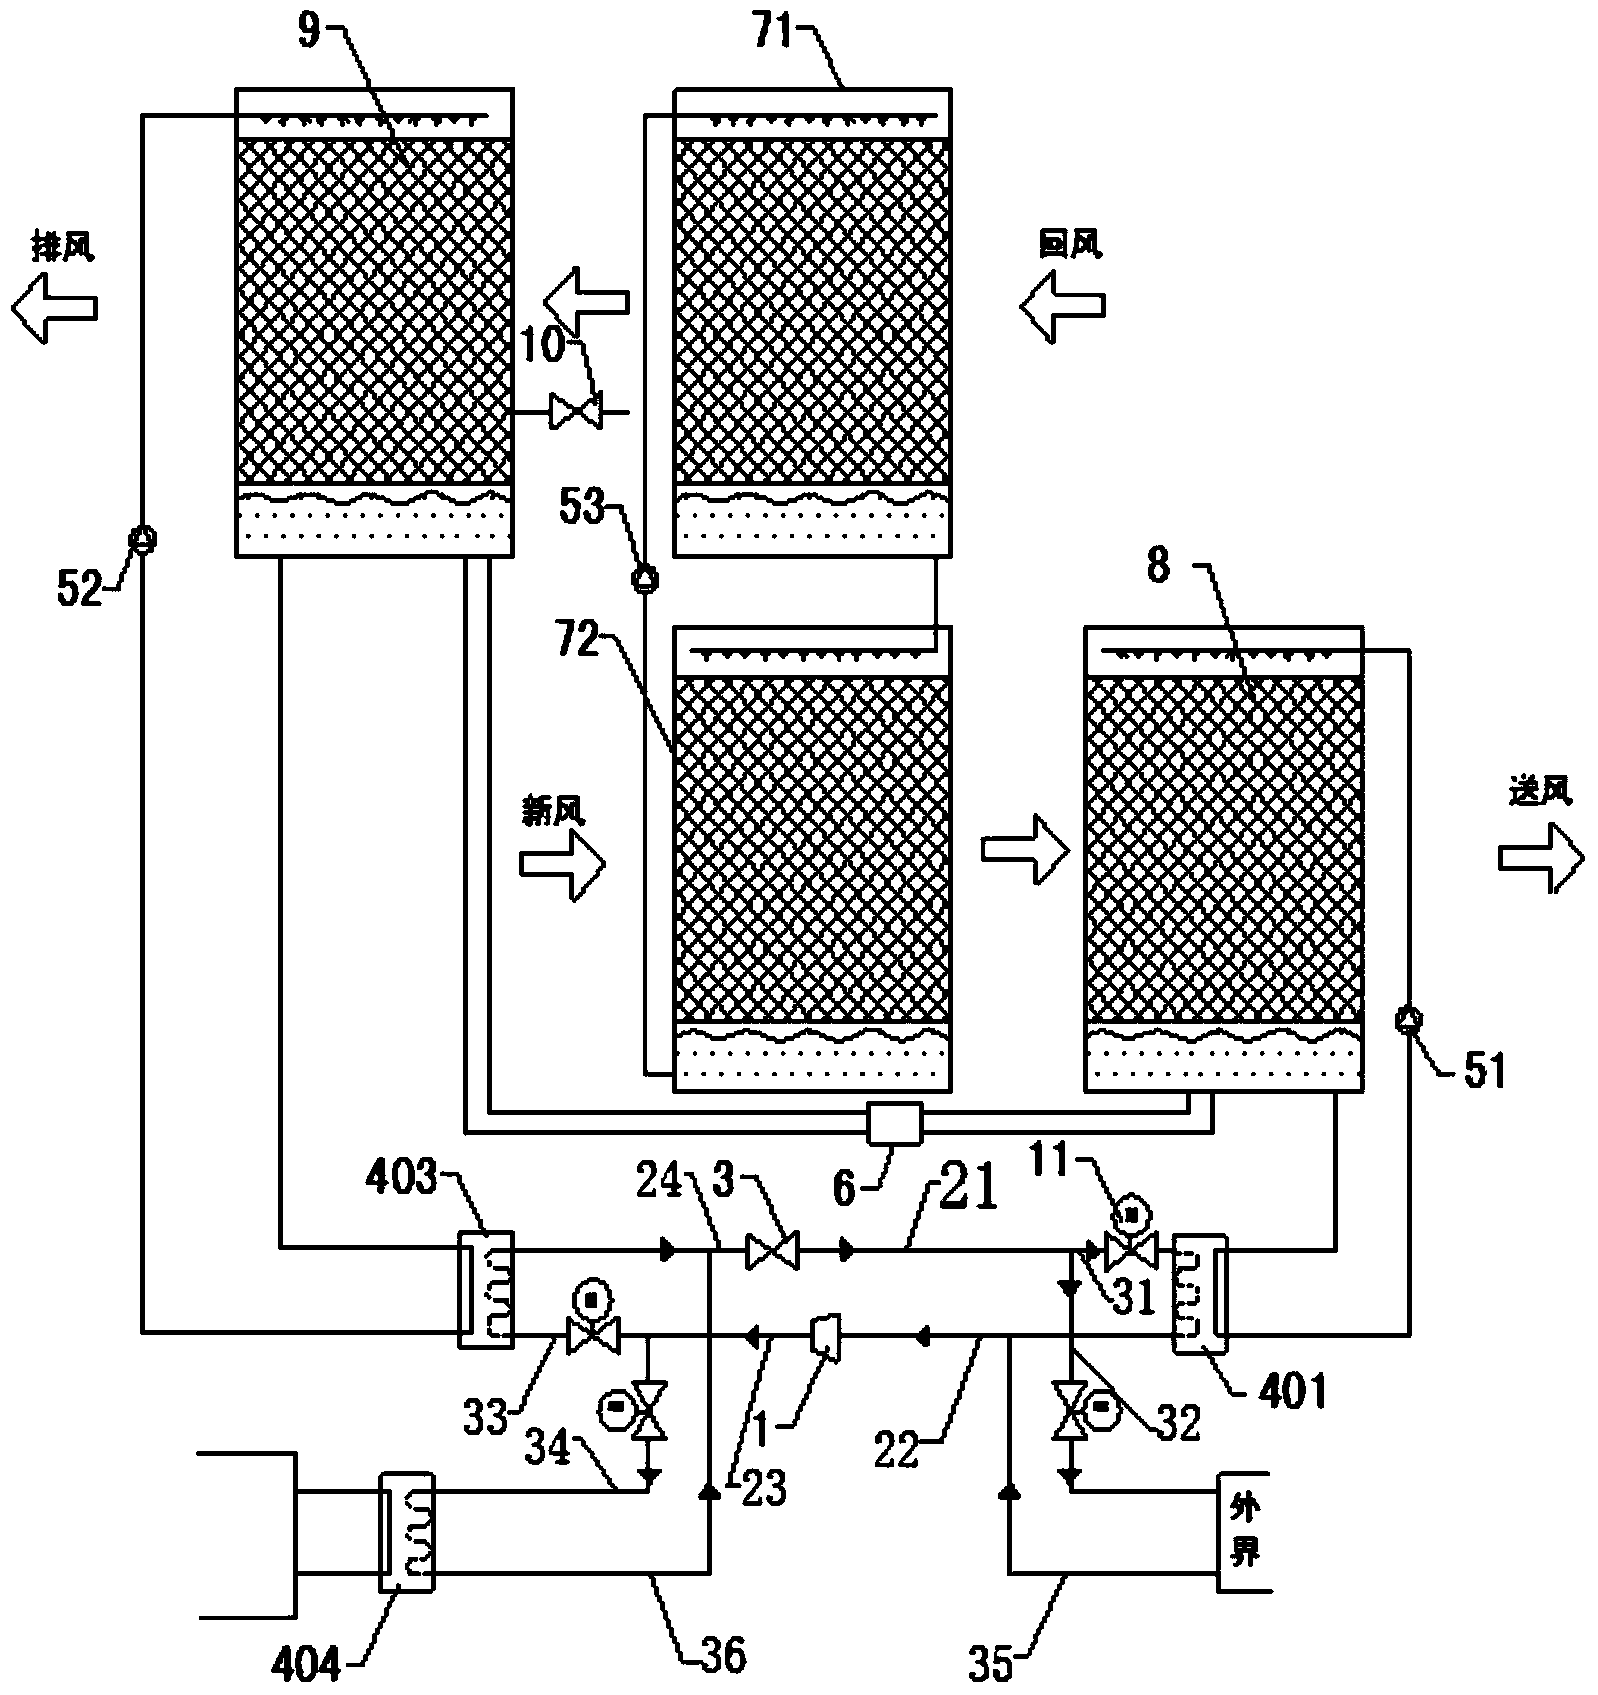 Air conditioning device capable of manufacturing coolants or heating media and simultaneously treating air heat loads and humidity loads